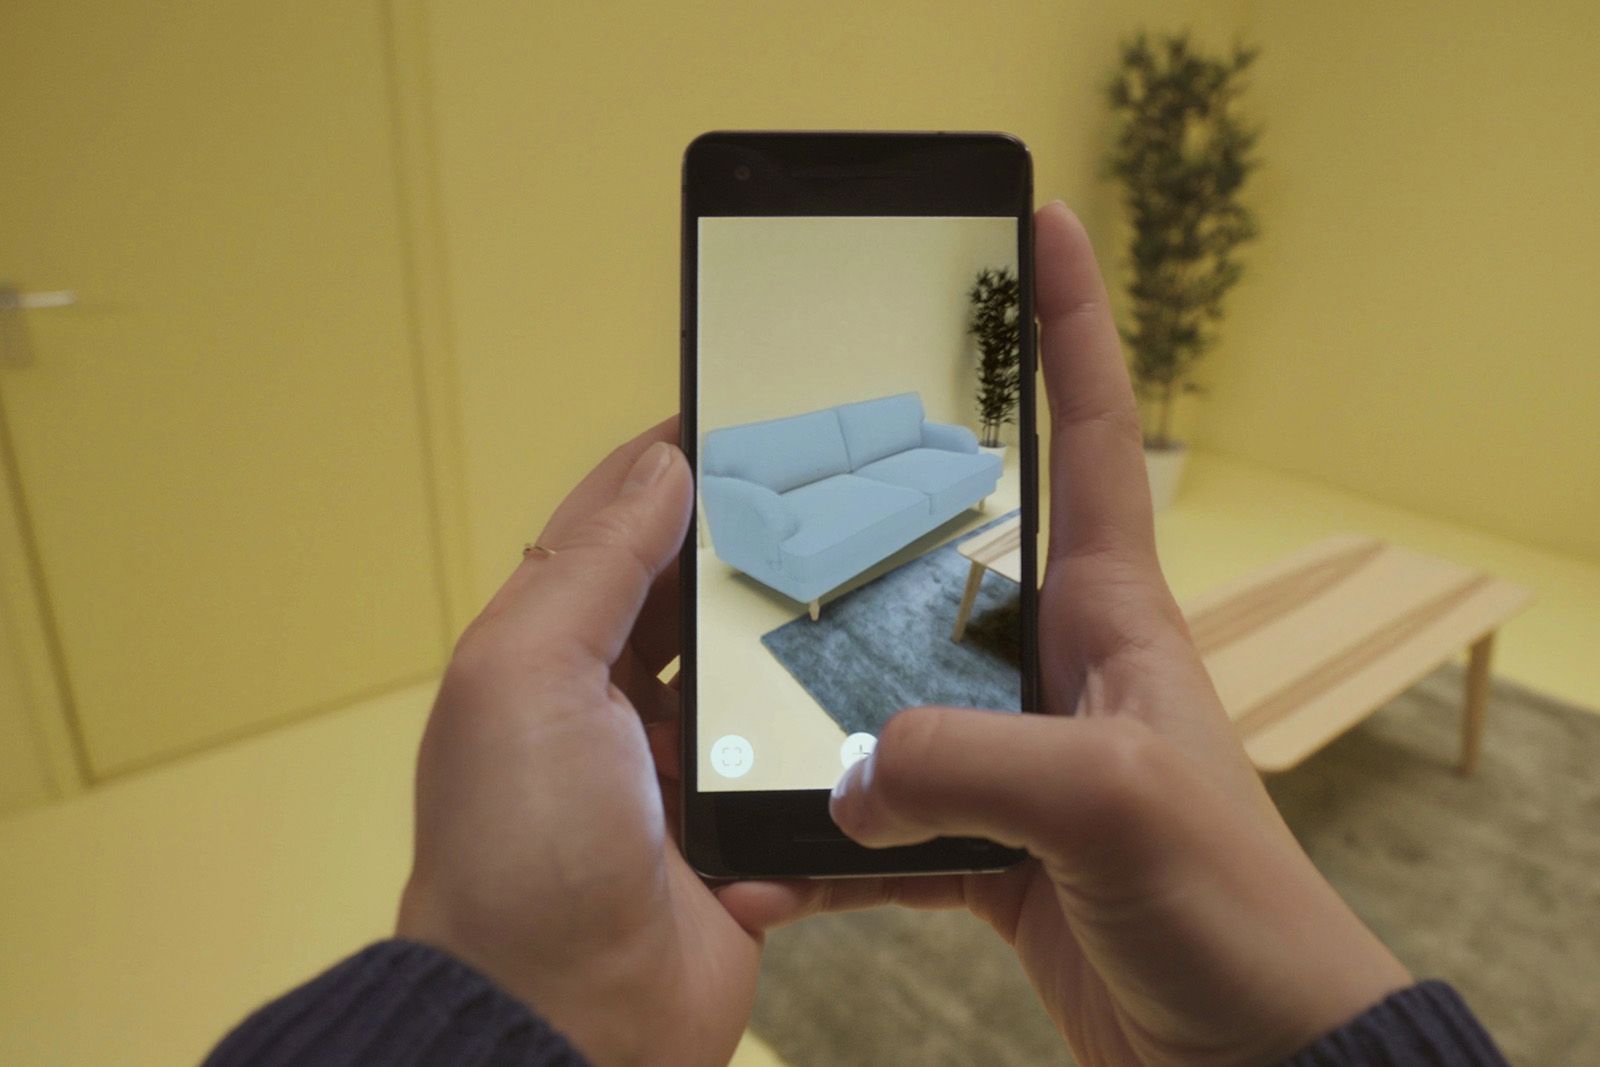 Ikea’s augmented reality ‘try before you buy’ app comes to Android thanks to ARCore image 1